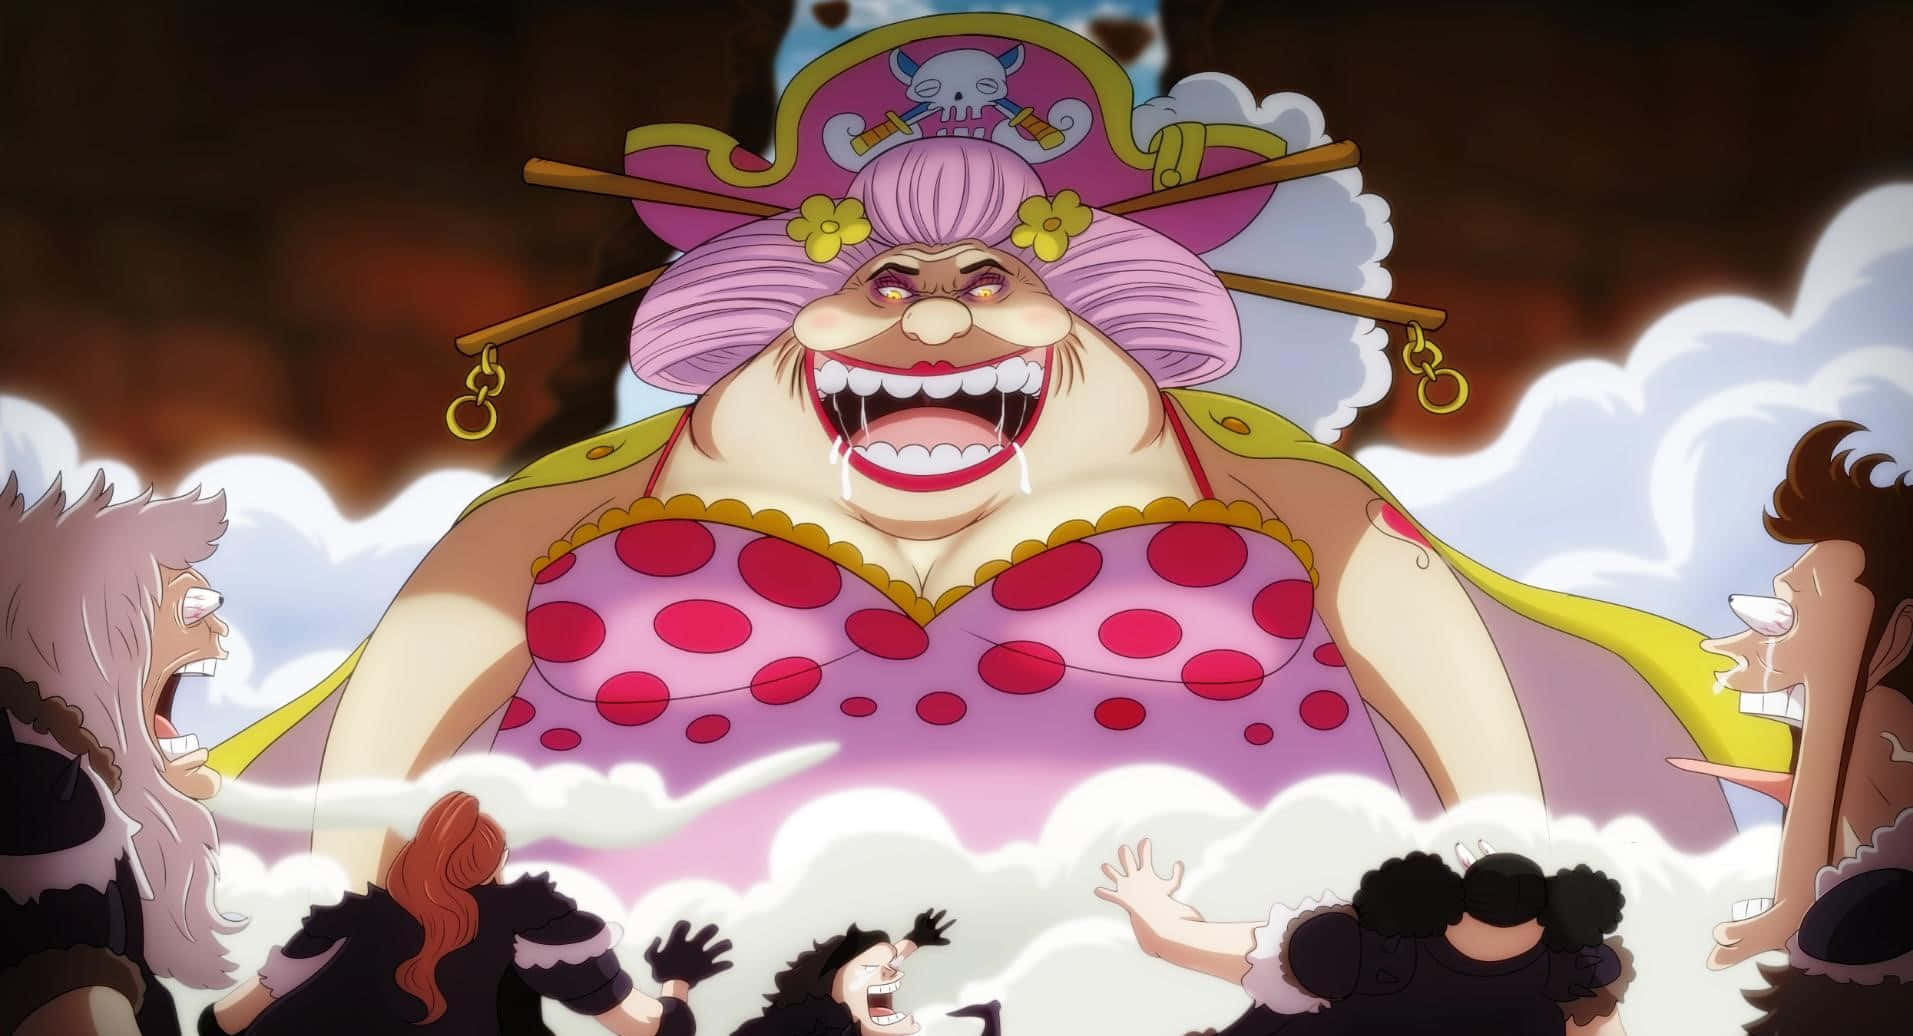 The imposing Big Mom pulls her way across the rugged terrain Wallpaper